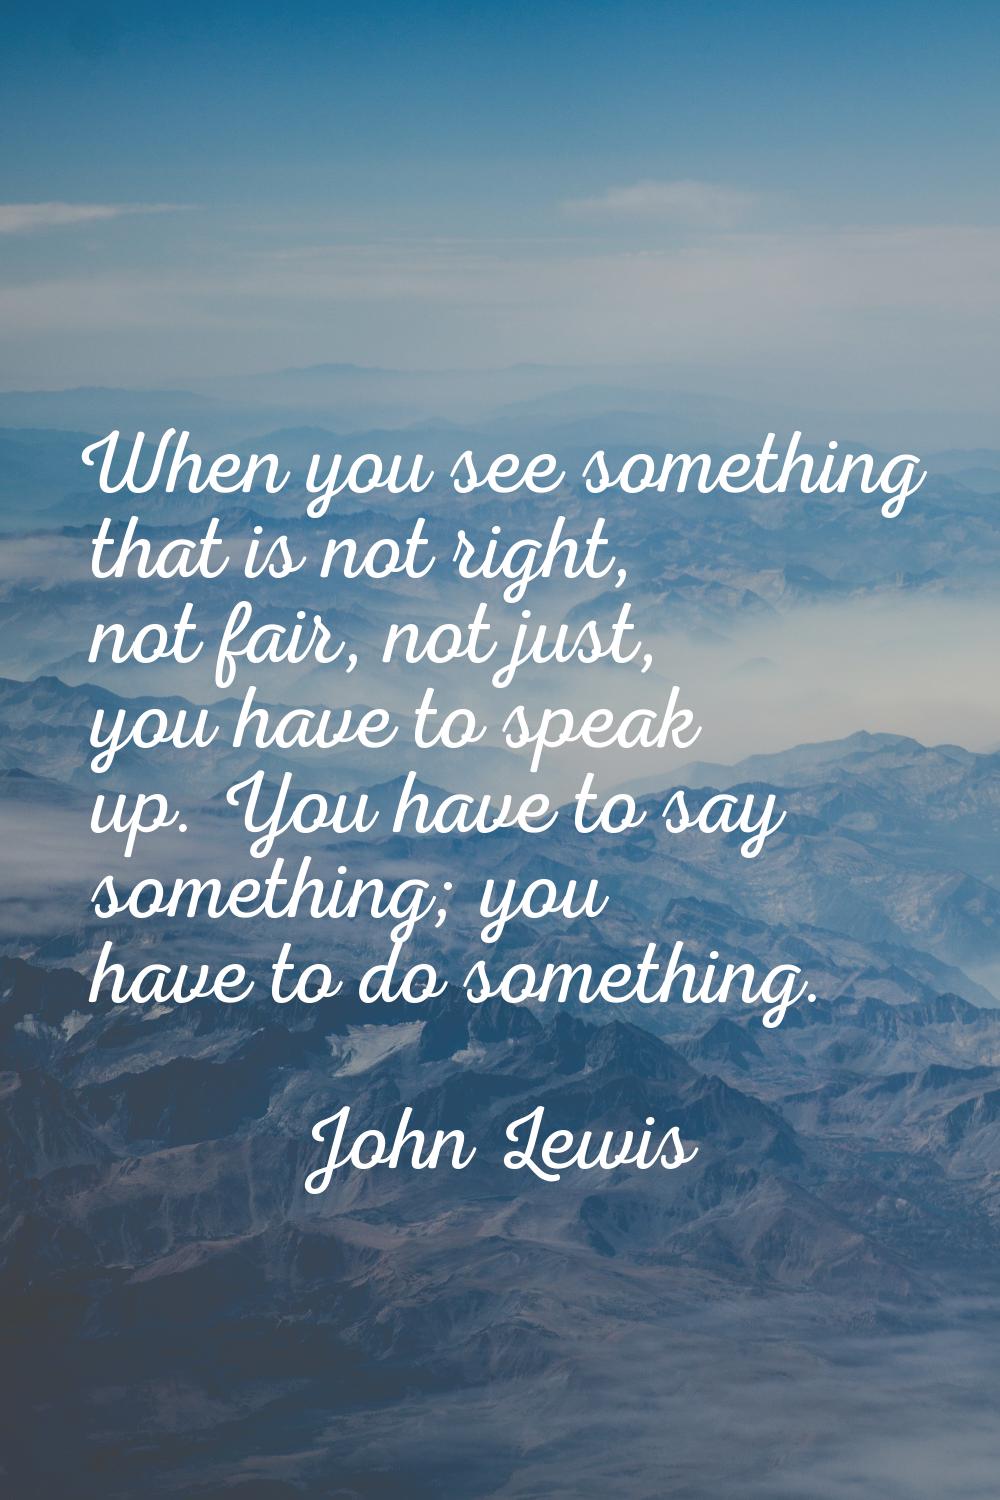 When you see something that is not right, not fair, not just, you have to speak up. You have to say